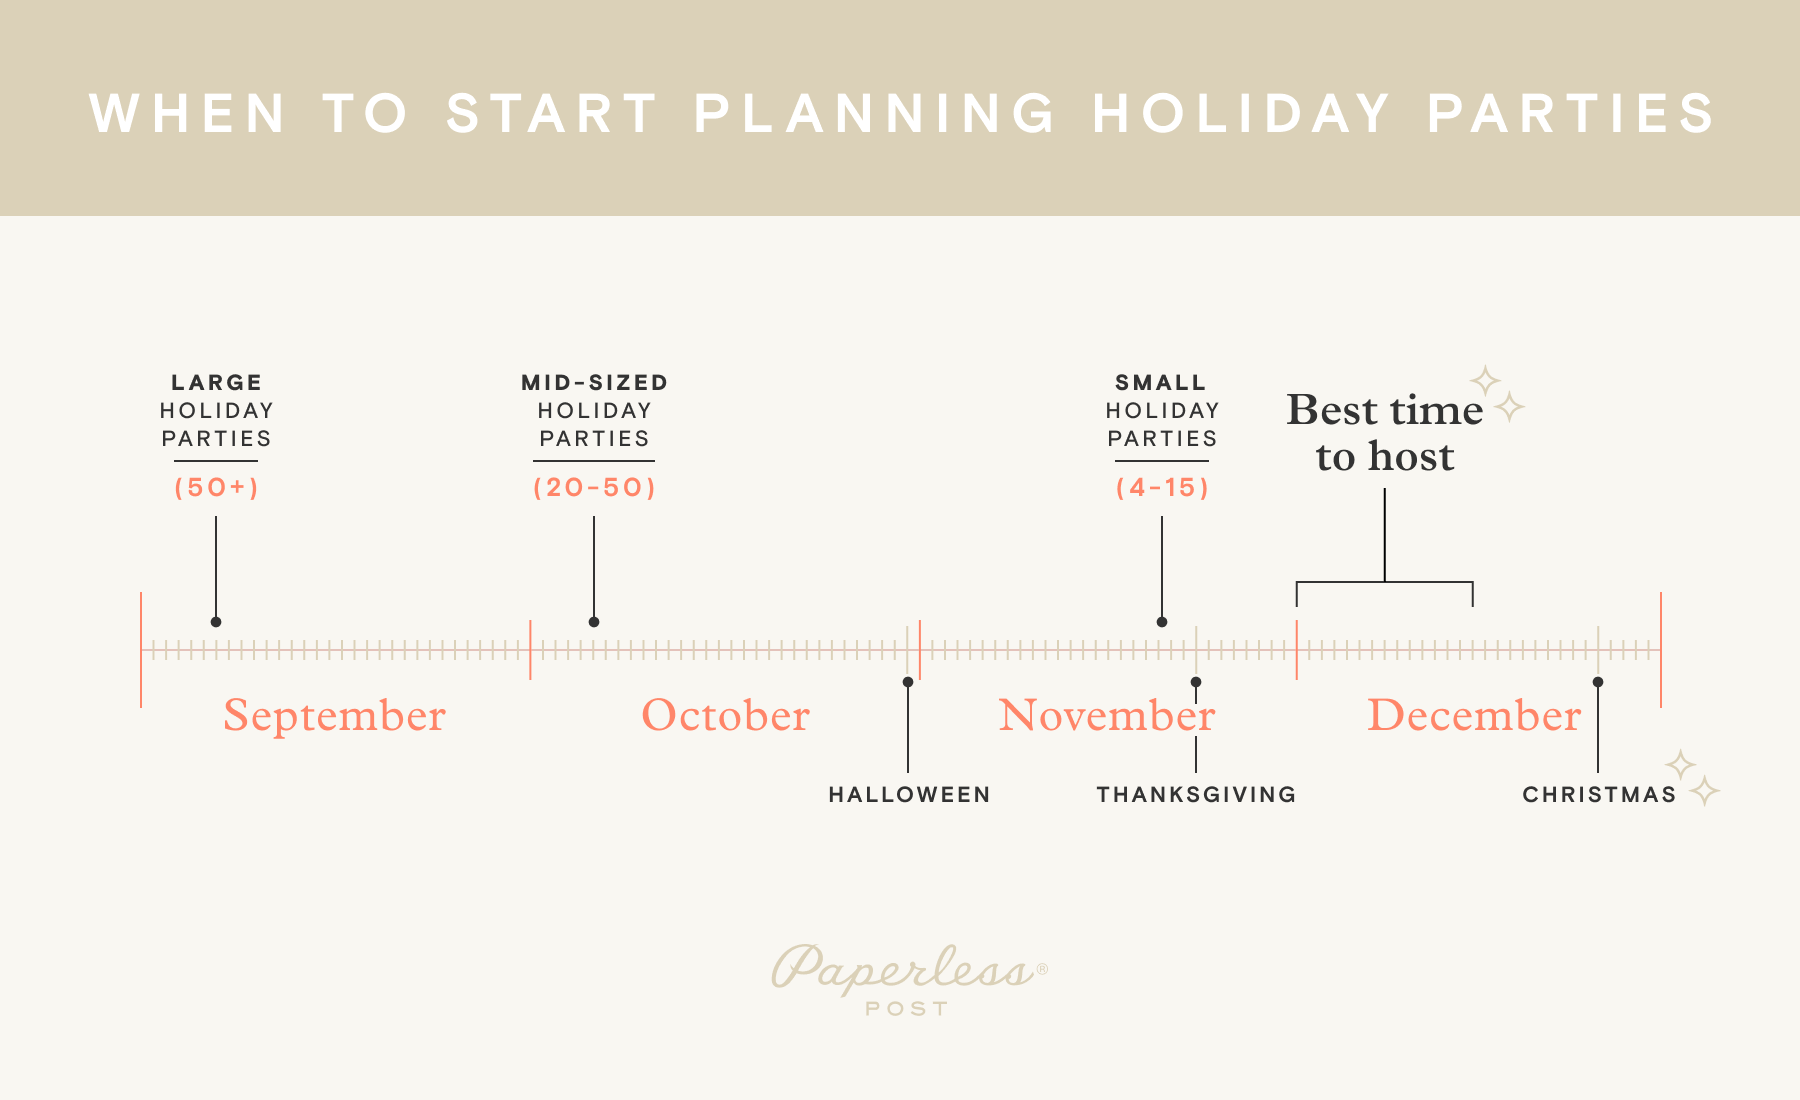 An infographic shows when to send and host holiday parties according to size, based on the advice found in this post.